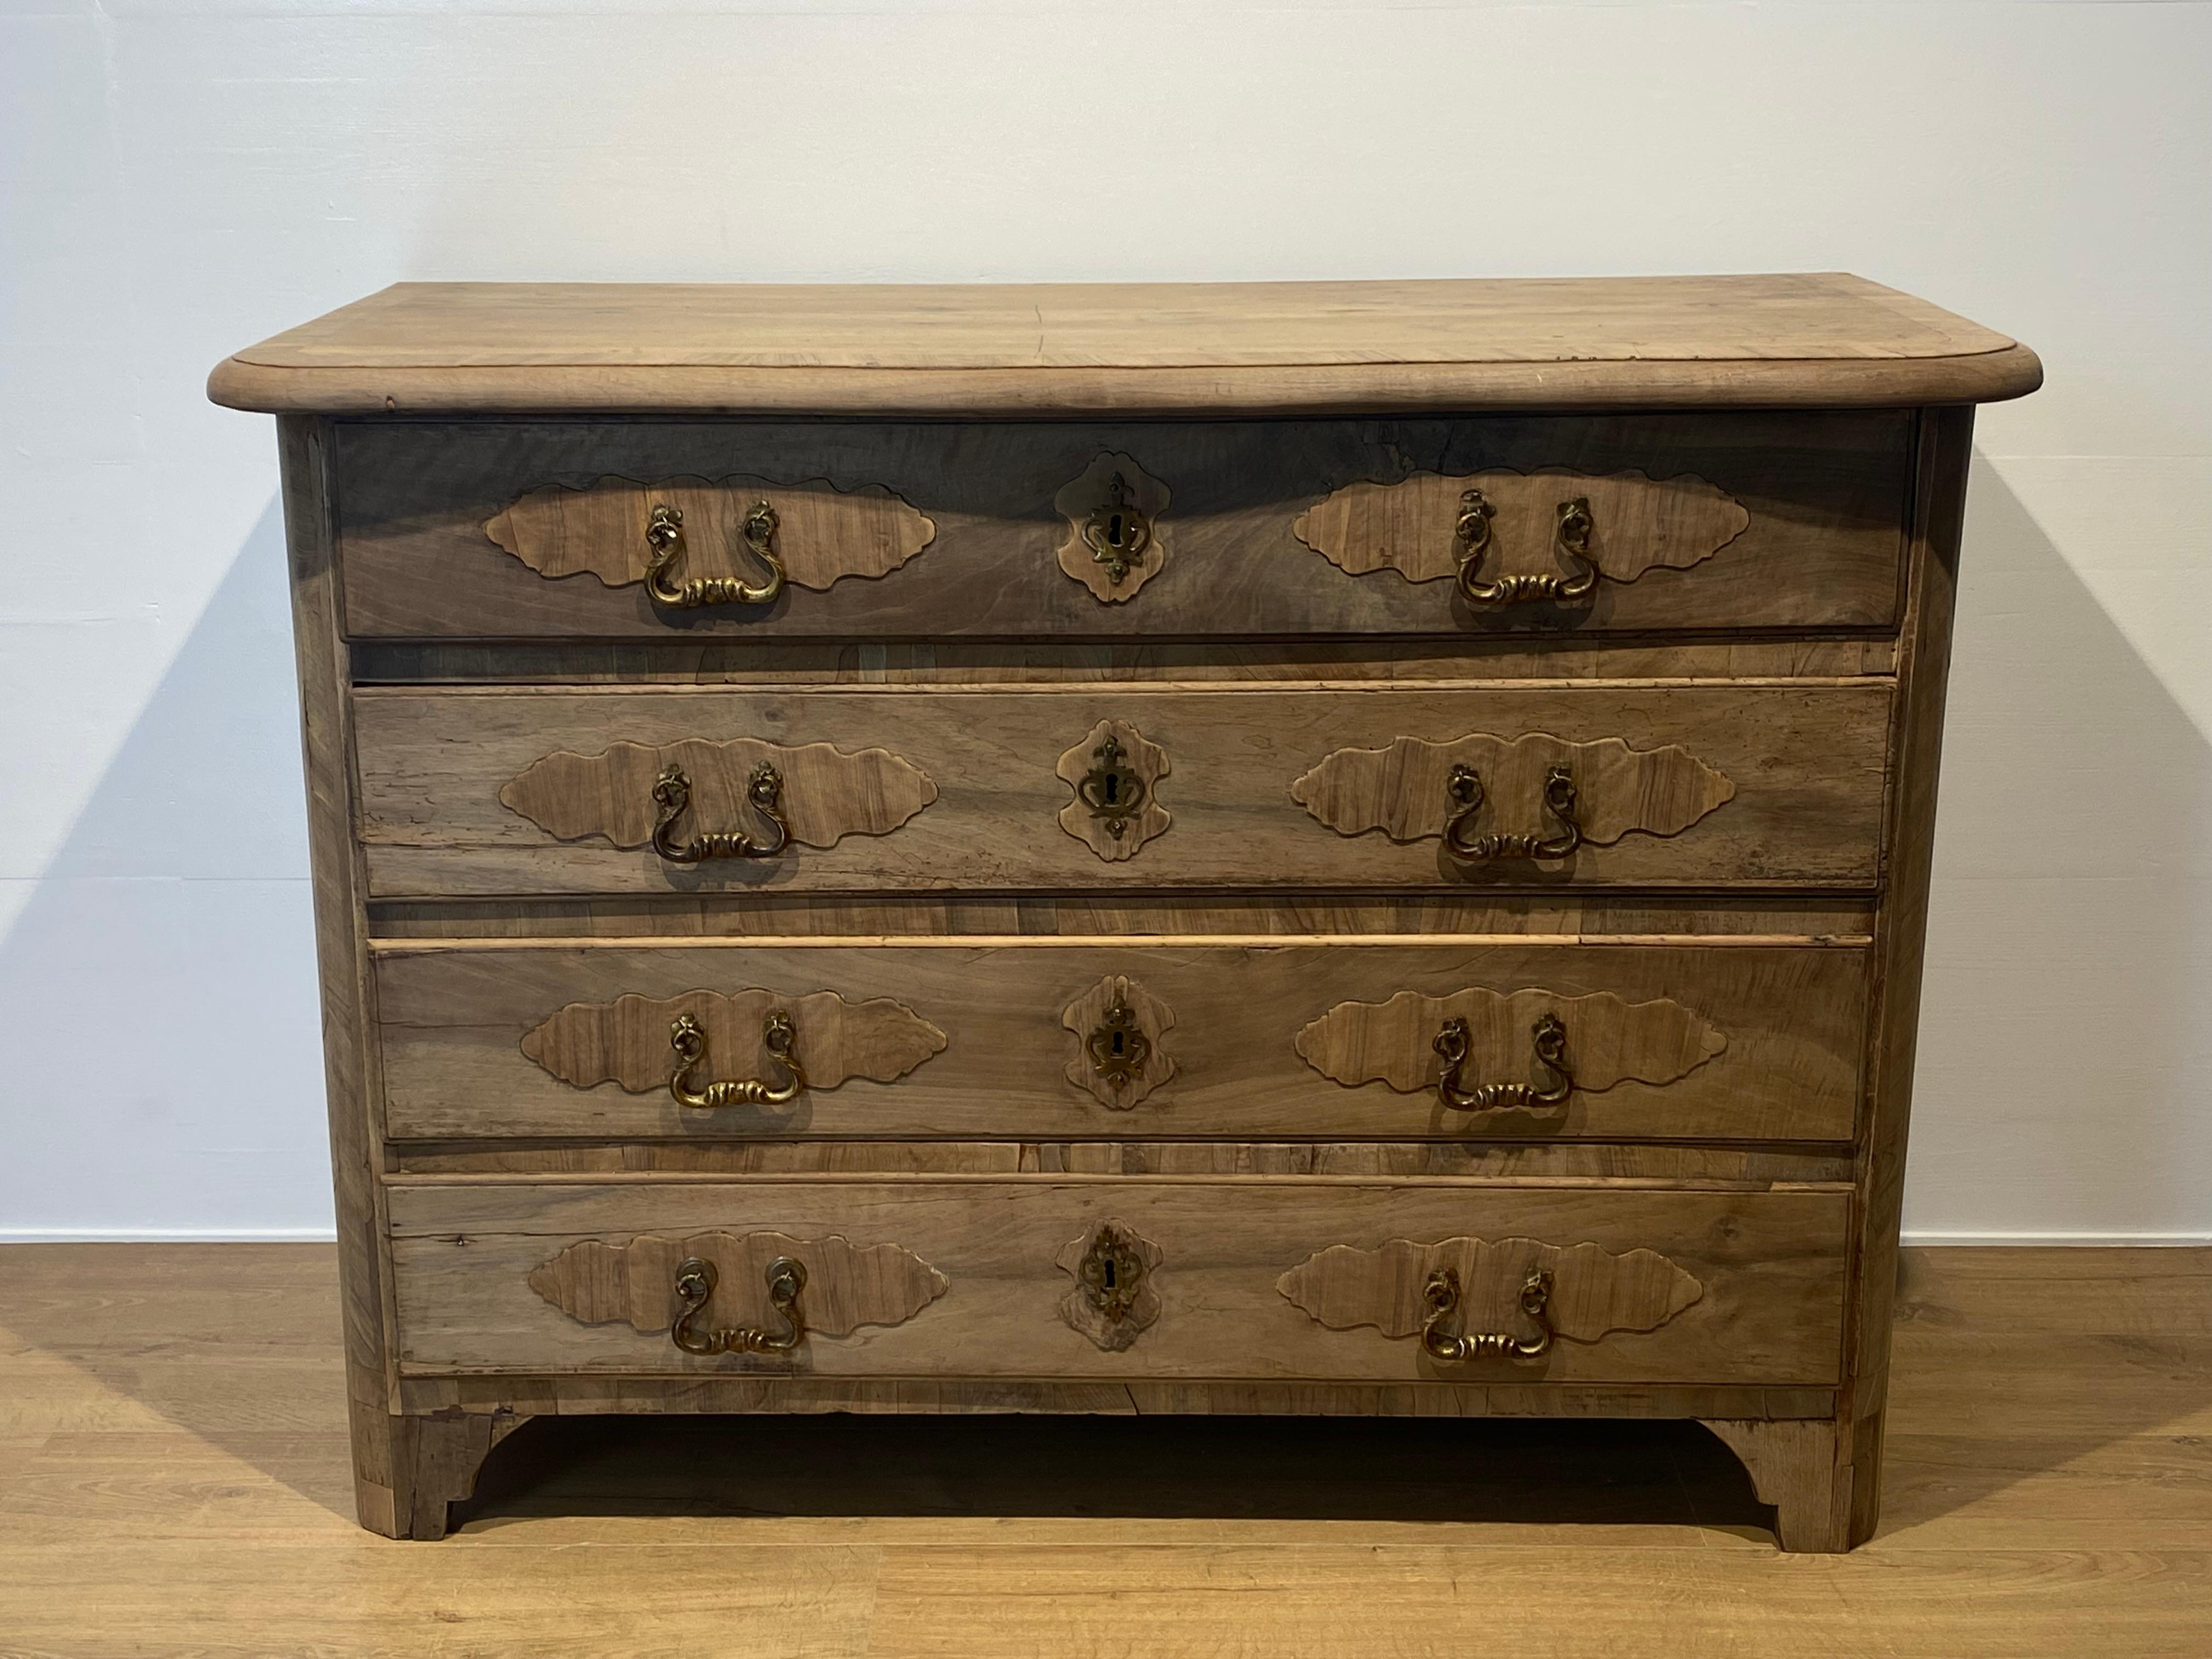 Antique Italian Commode in bleached Walnut In Excellent Condition For Sale In Schellebelle, BE